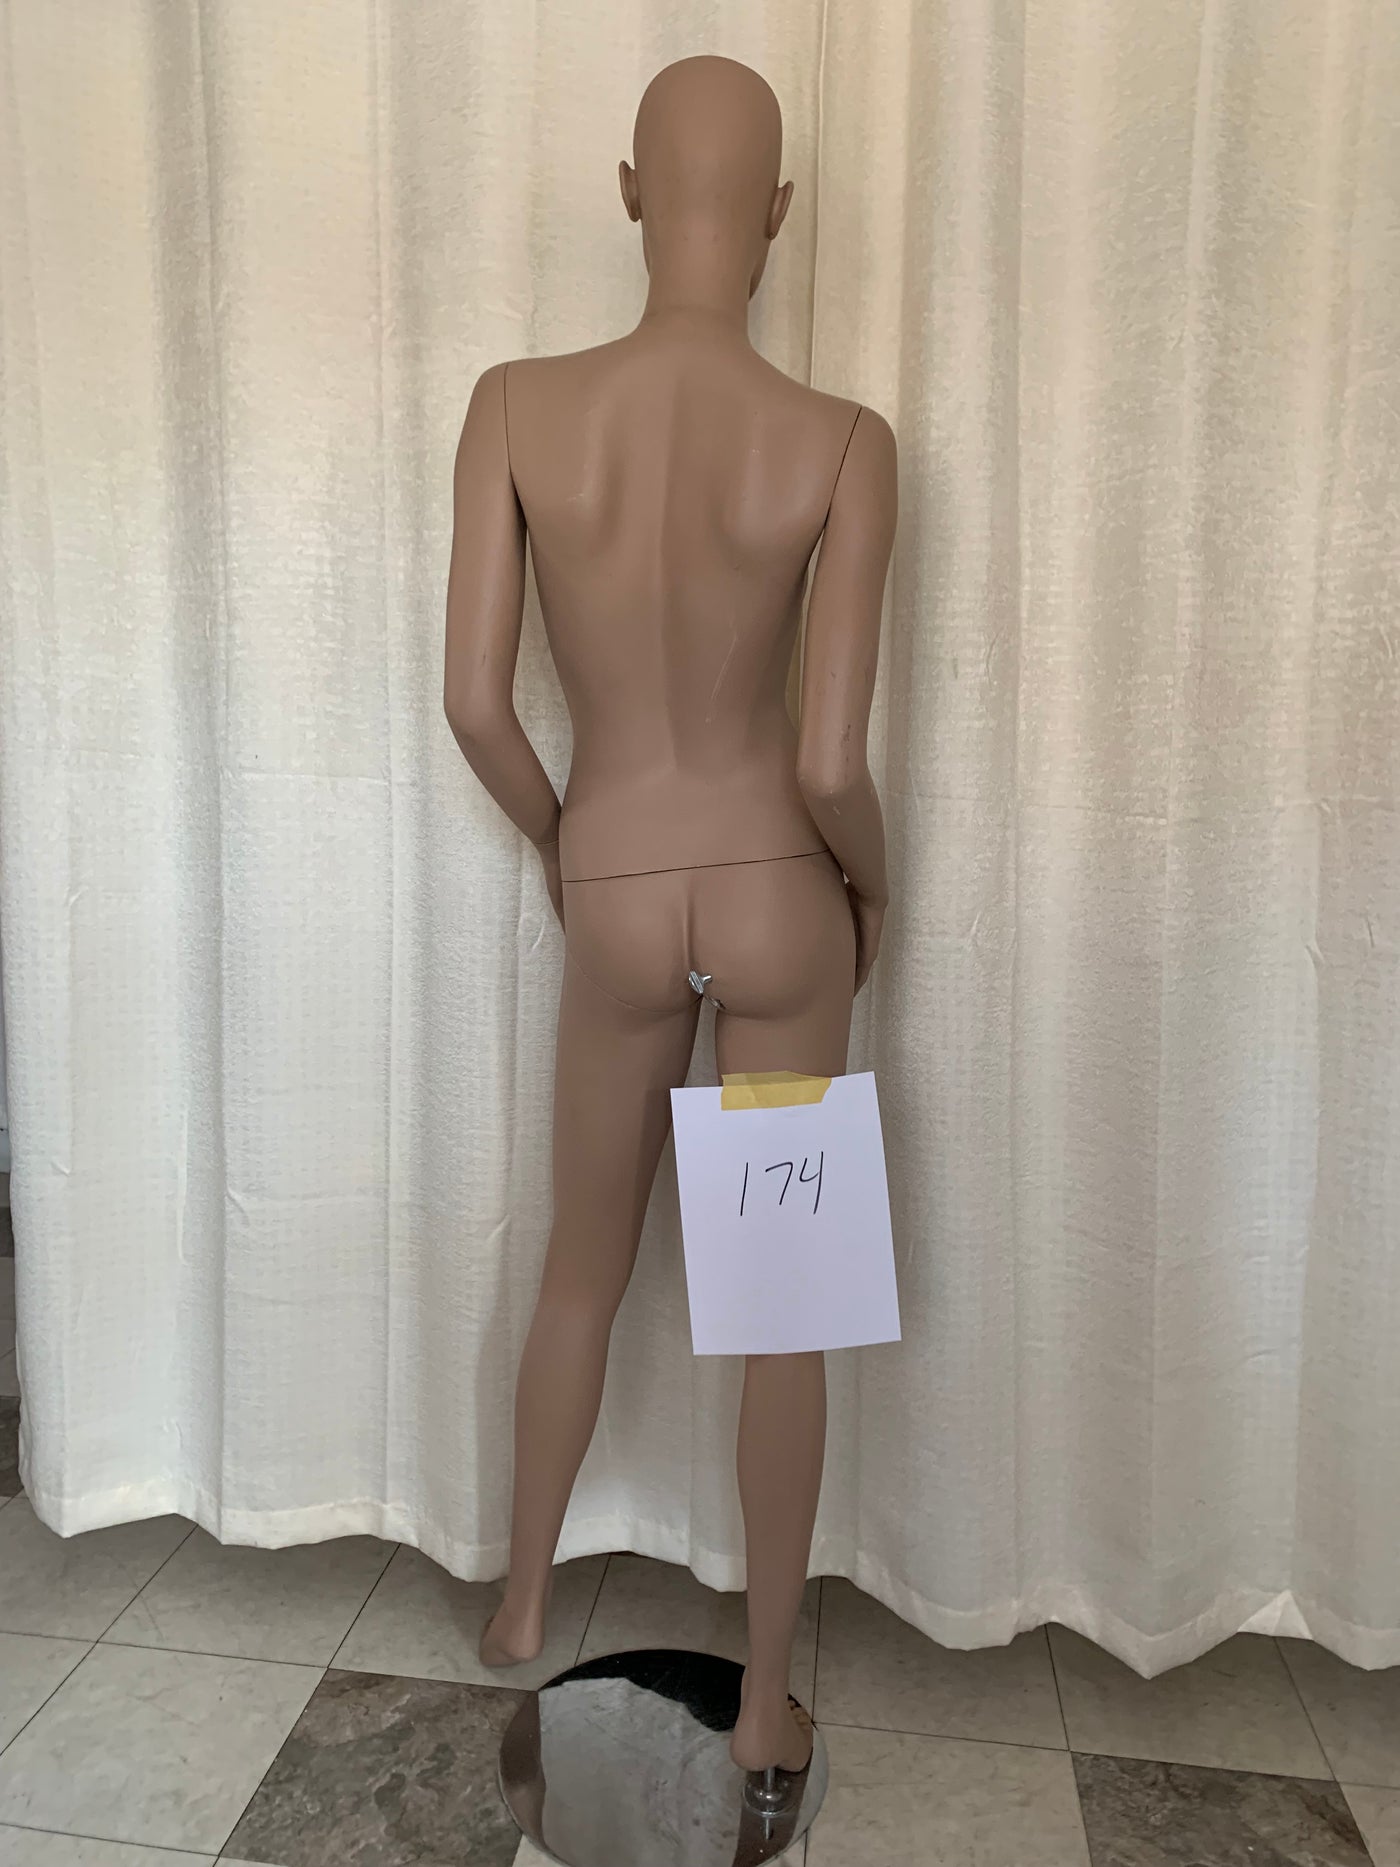 Used Female Adel Rootstein Mannequin  #174  Girl Thing